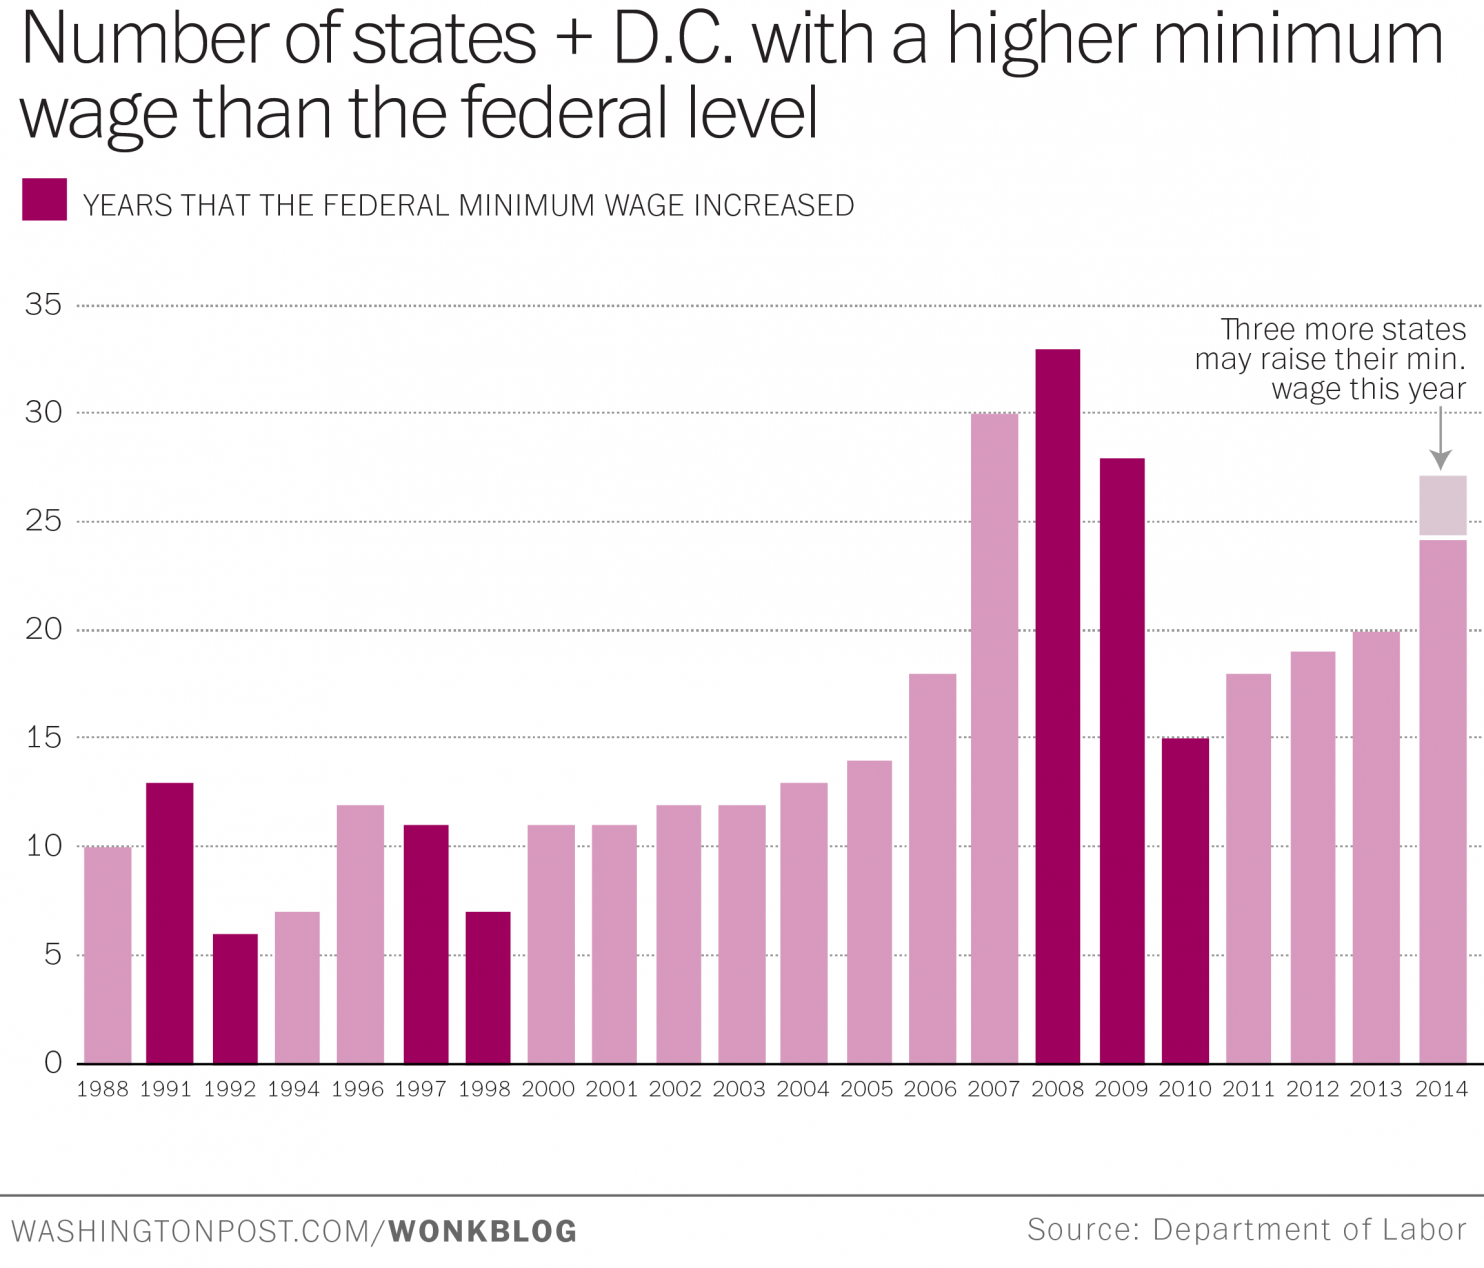 http://www.ritholtz.com/blog/2014/11/the-spread-of-state-minimum-wage-laws-is-making-congress-look-bad/